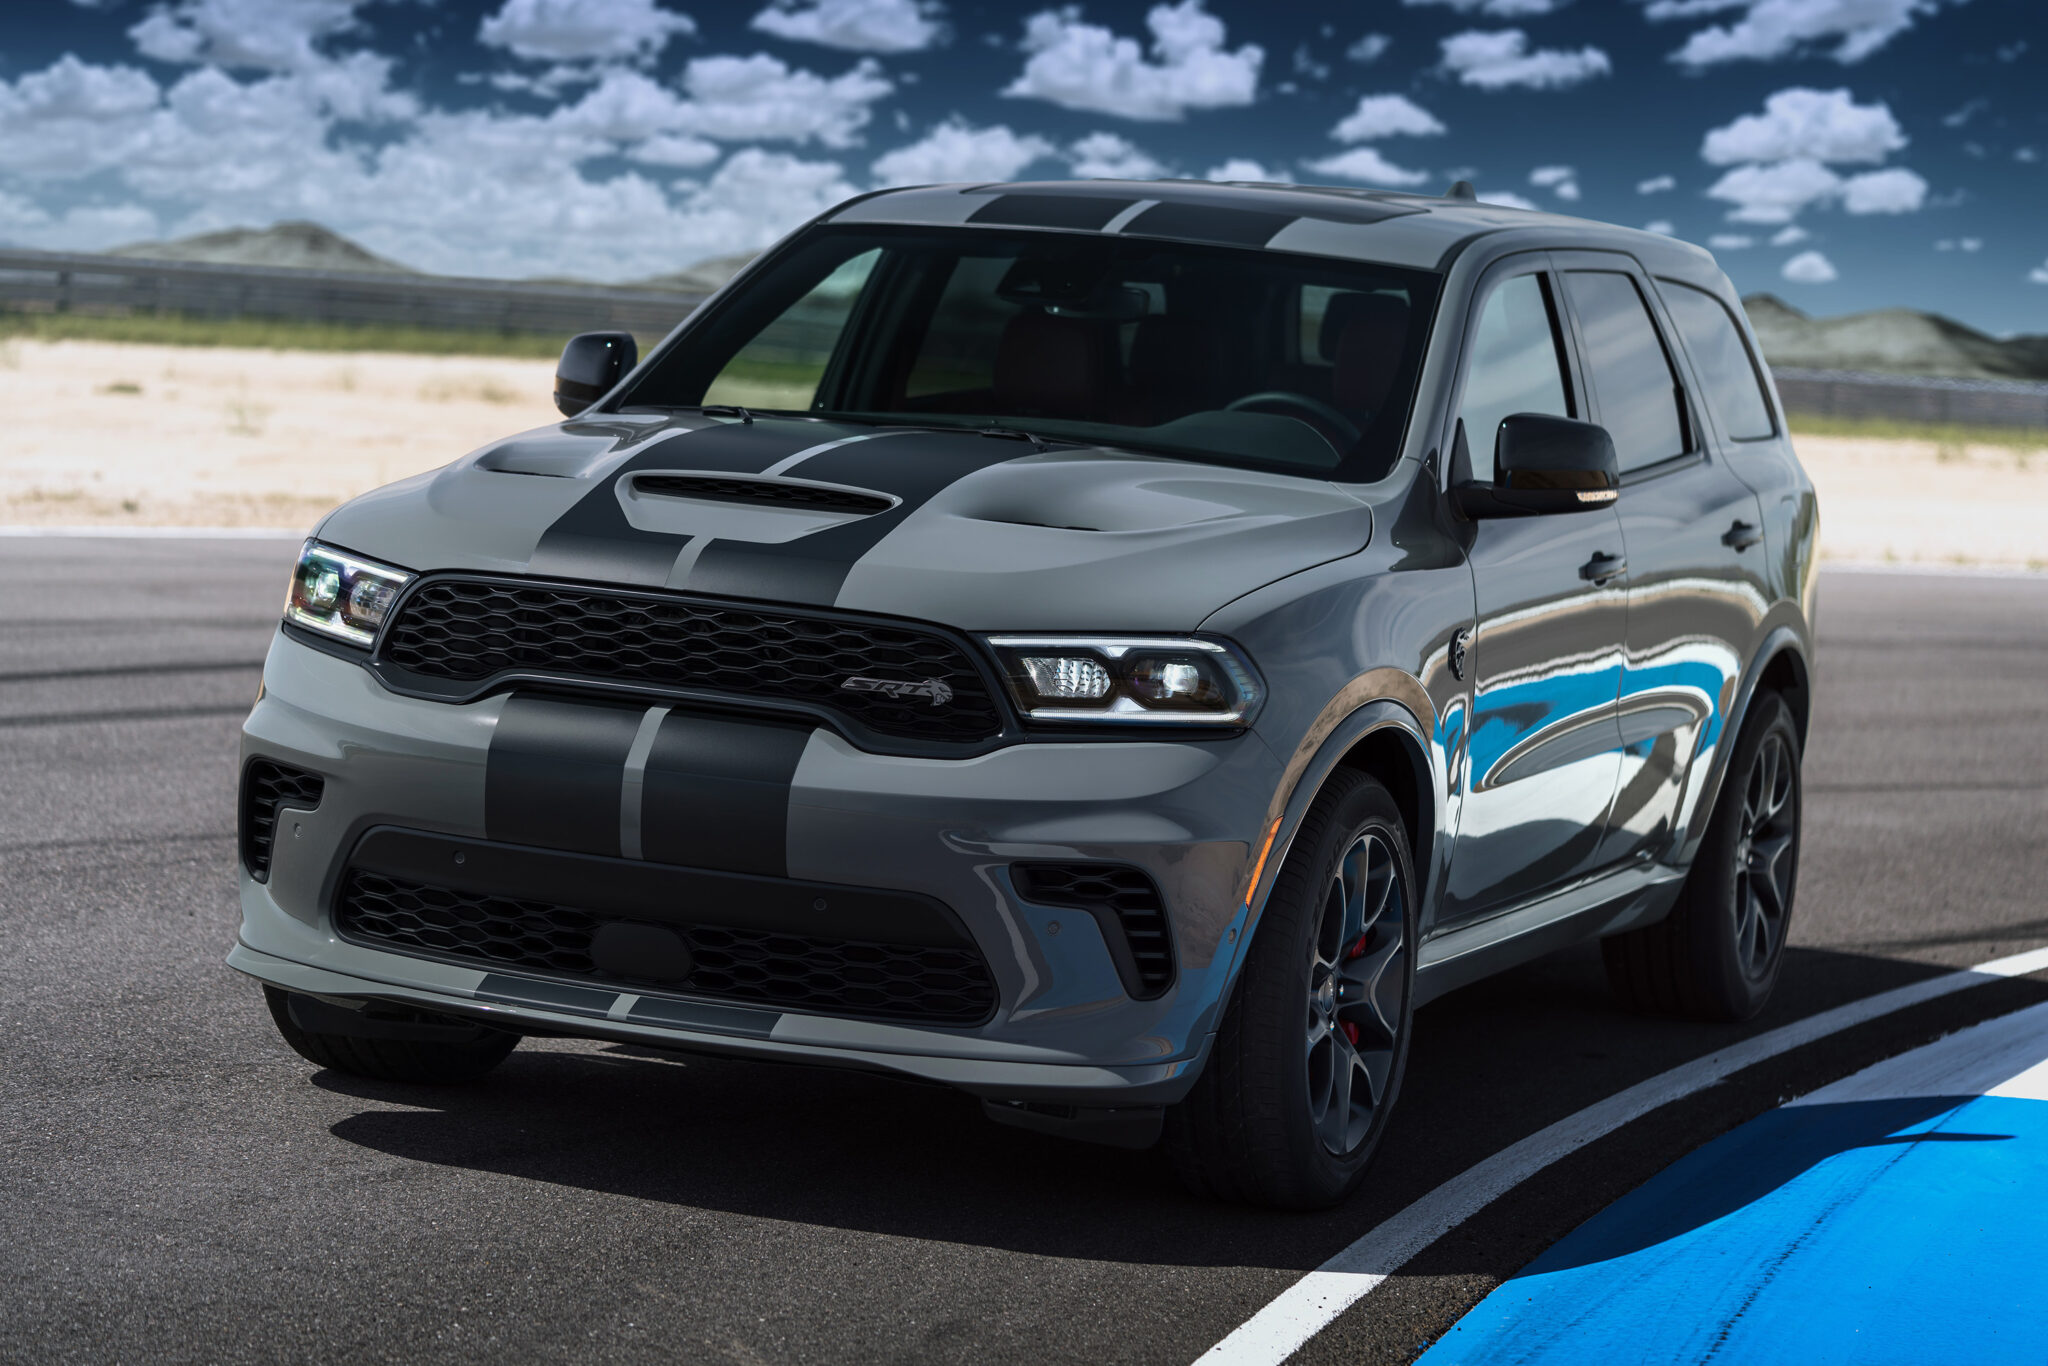 Dodge Durango SRT Hellcat Powered by the proven supercharged 6